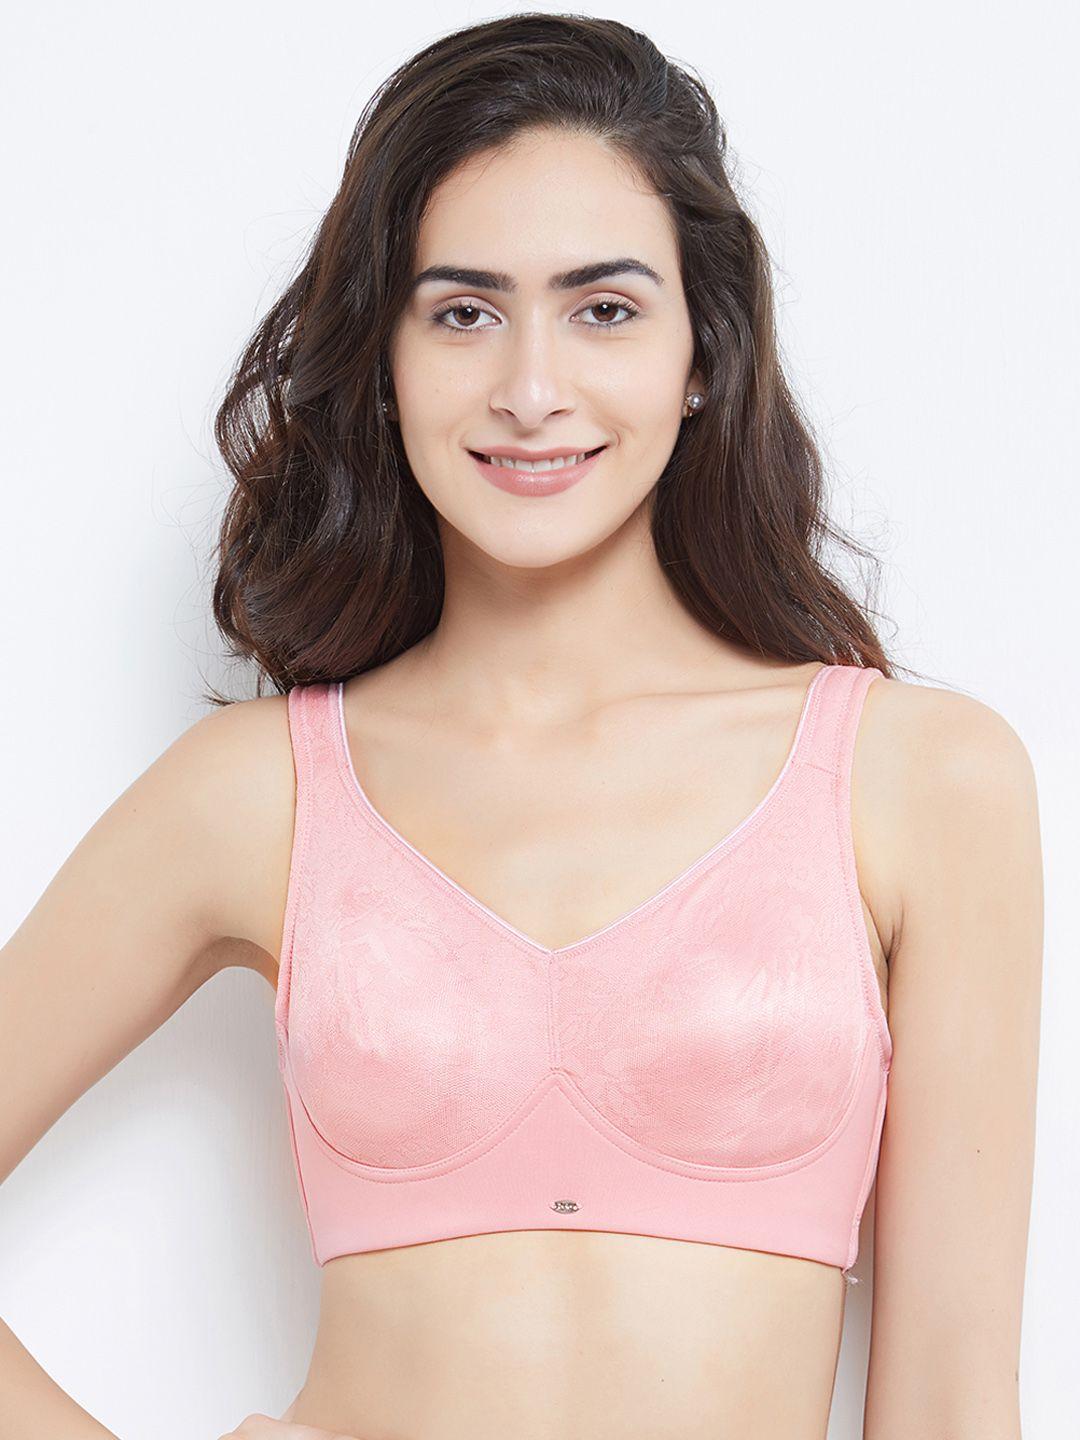 soie-pink-solid-non-wired-non-padded-minimizer-bra-cb-326lavender